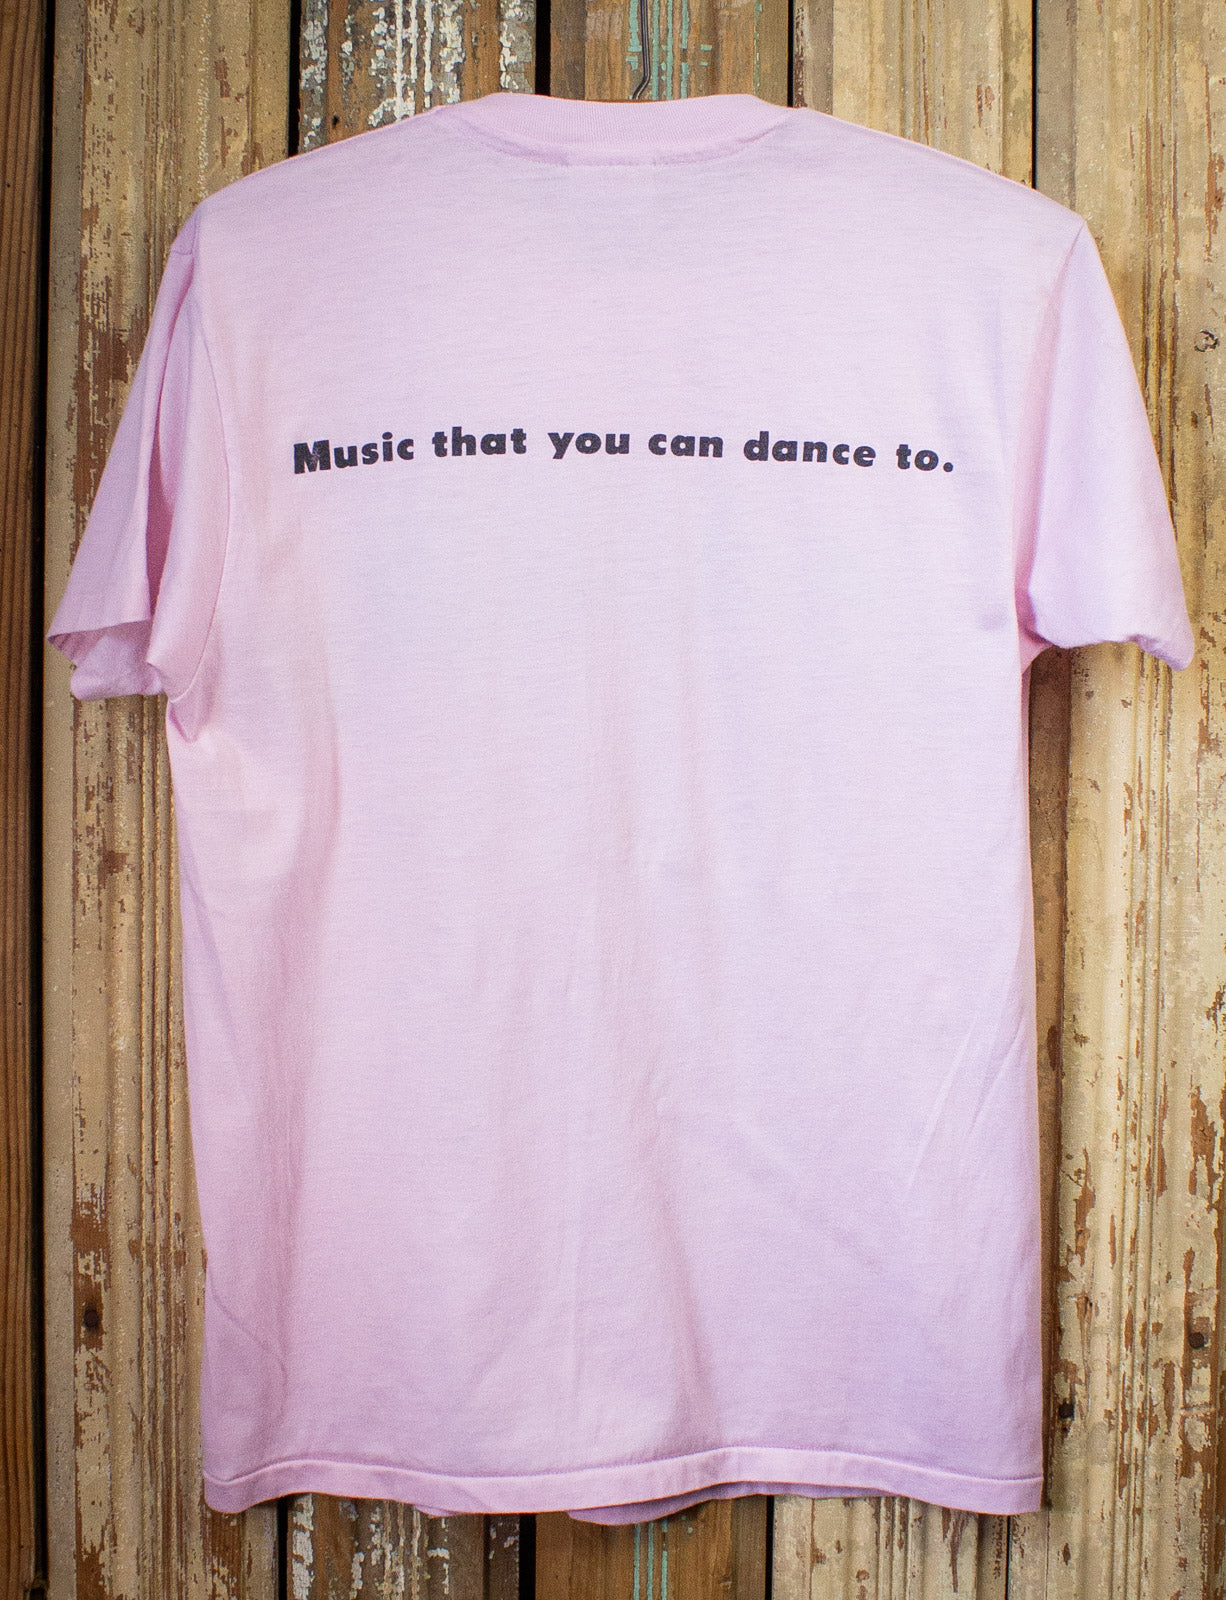 Vintage Sparks Music That You Can Dance To Concert T Shirt 1986 Pink Medium